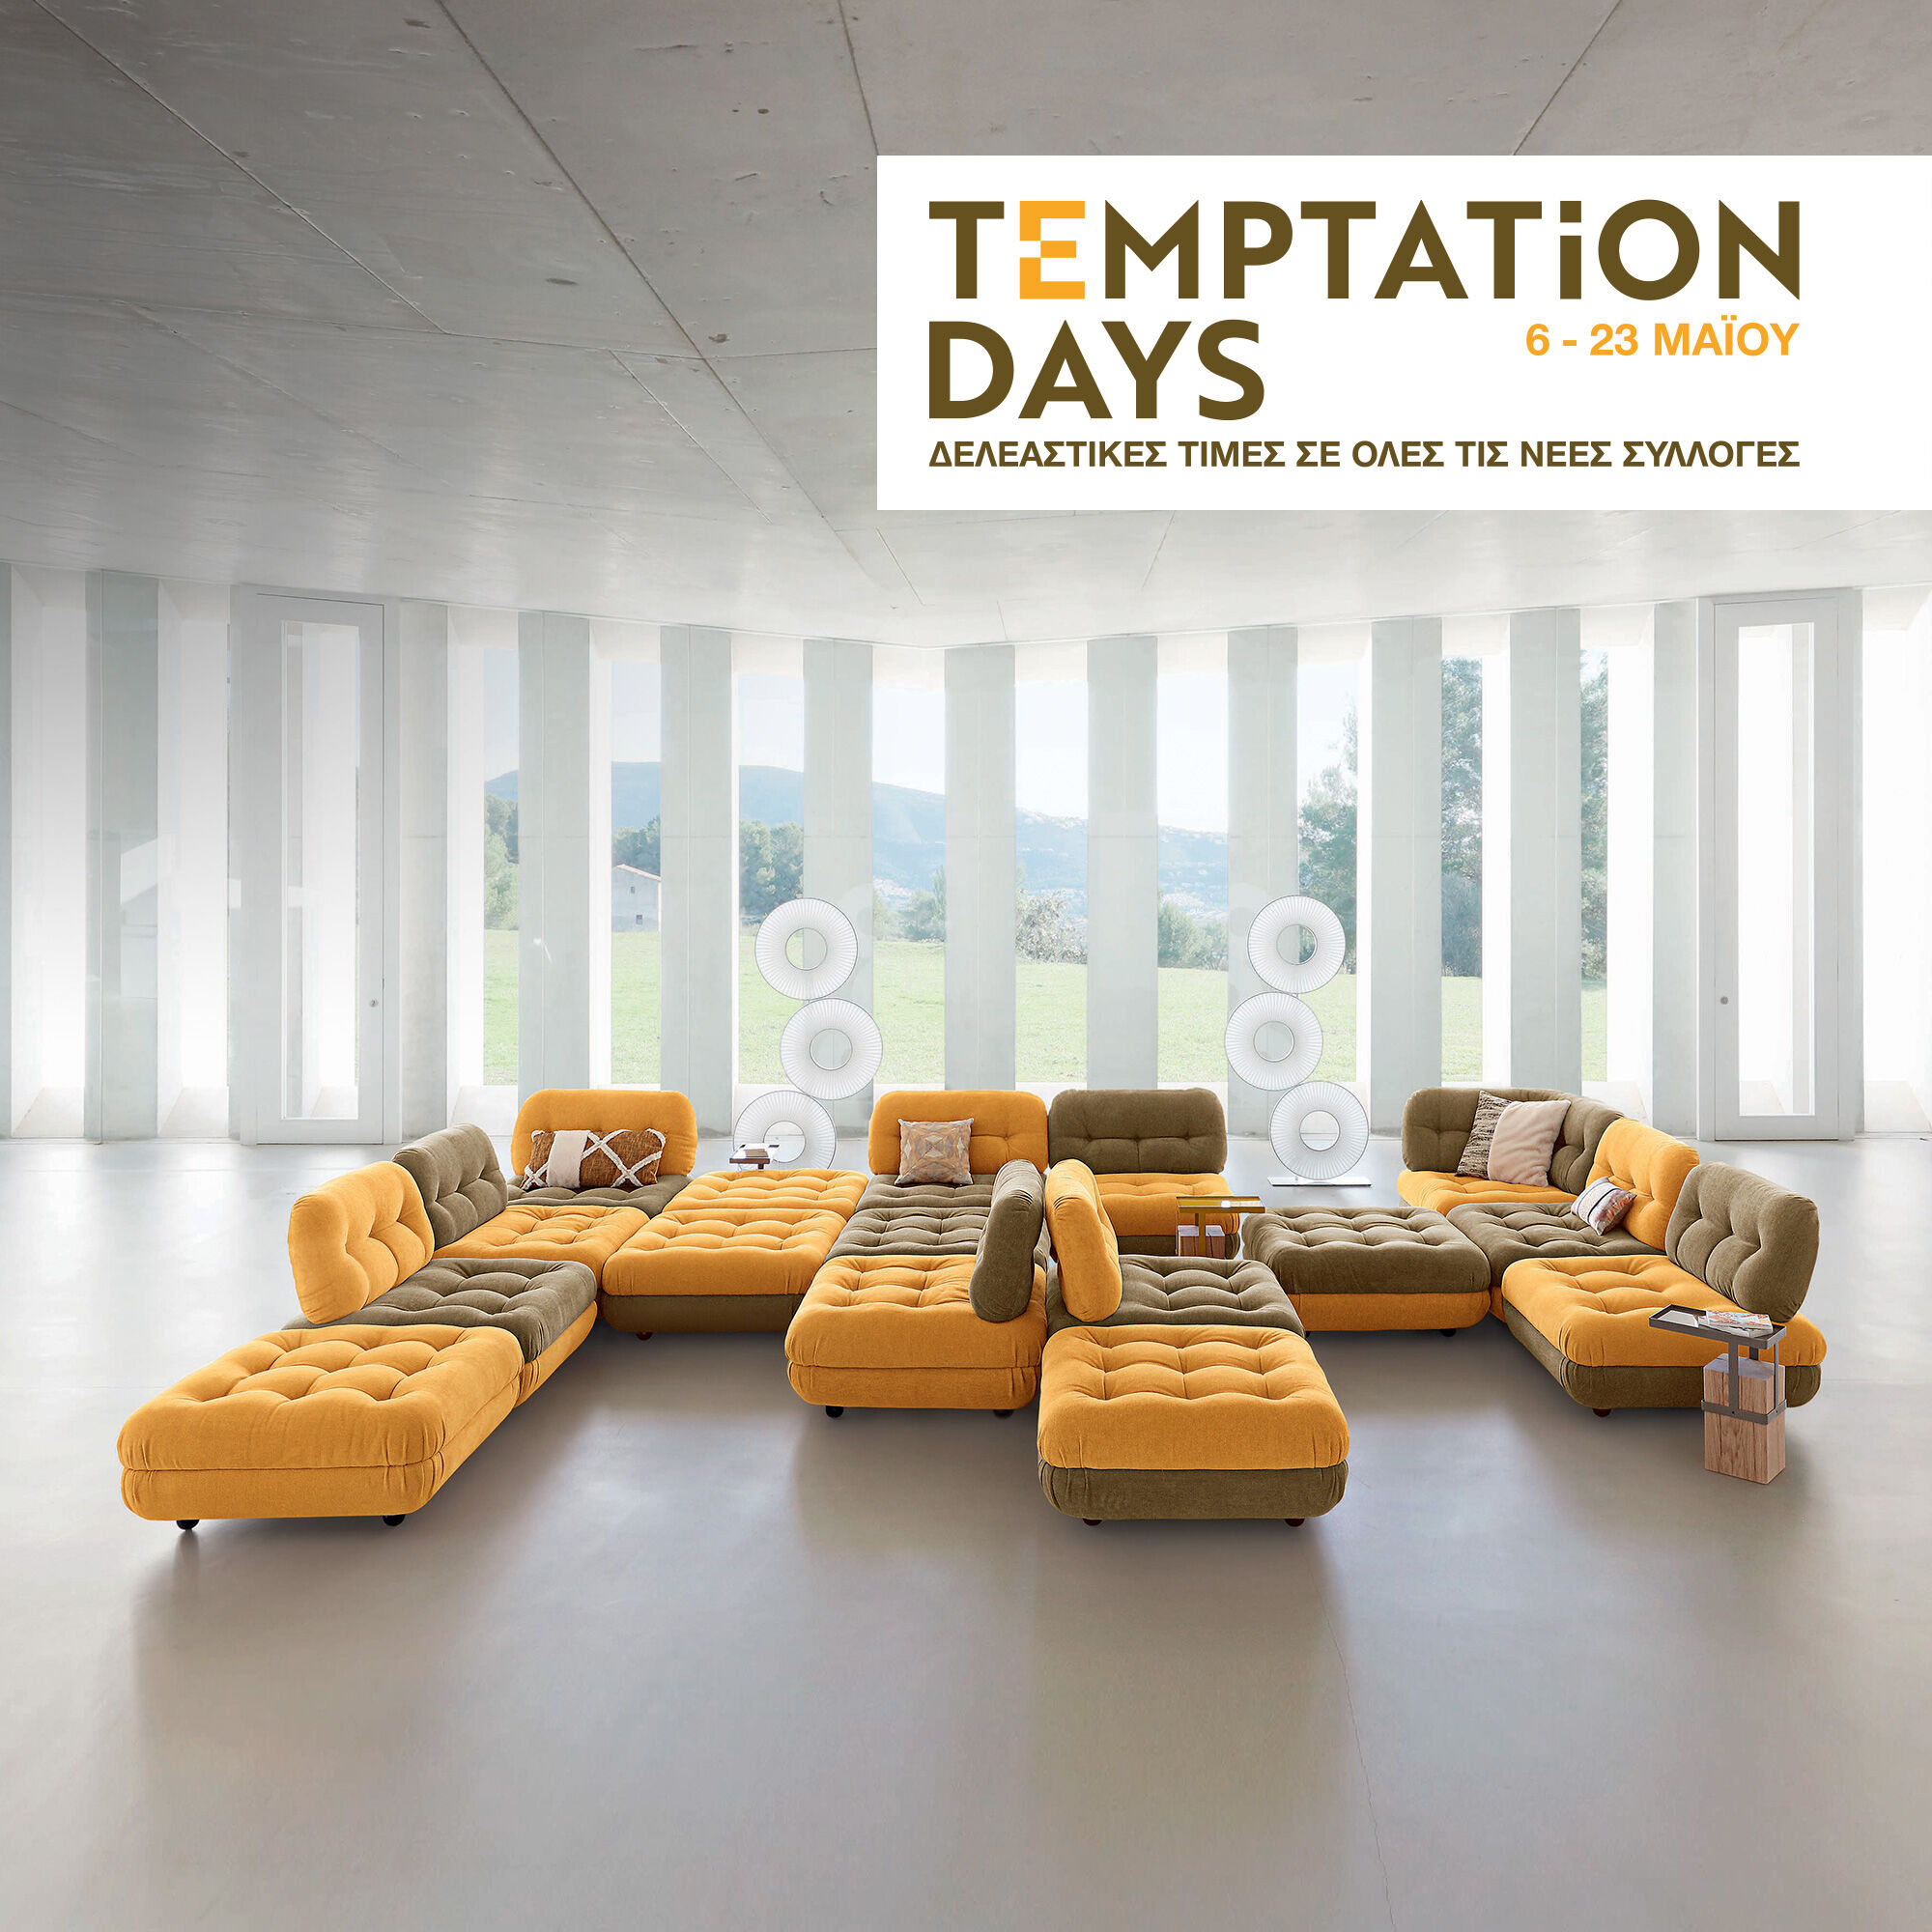 Temptation Days, From May 6th to May 23rd